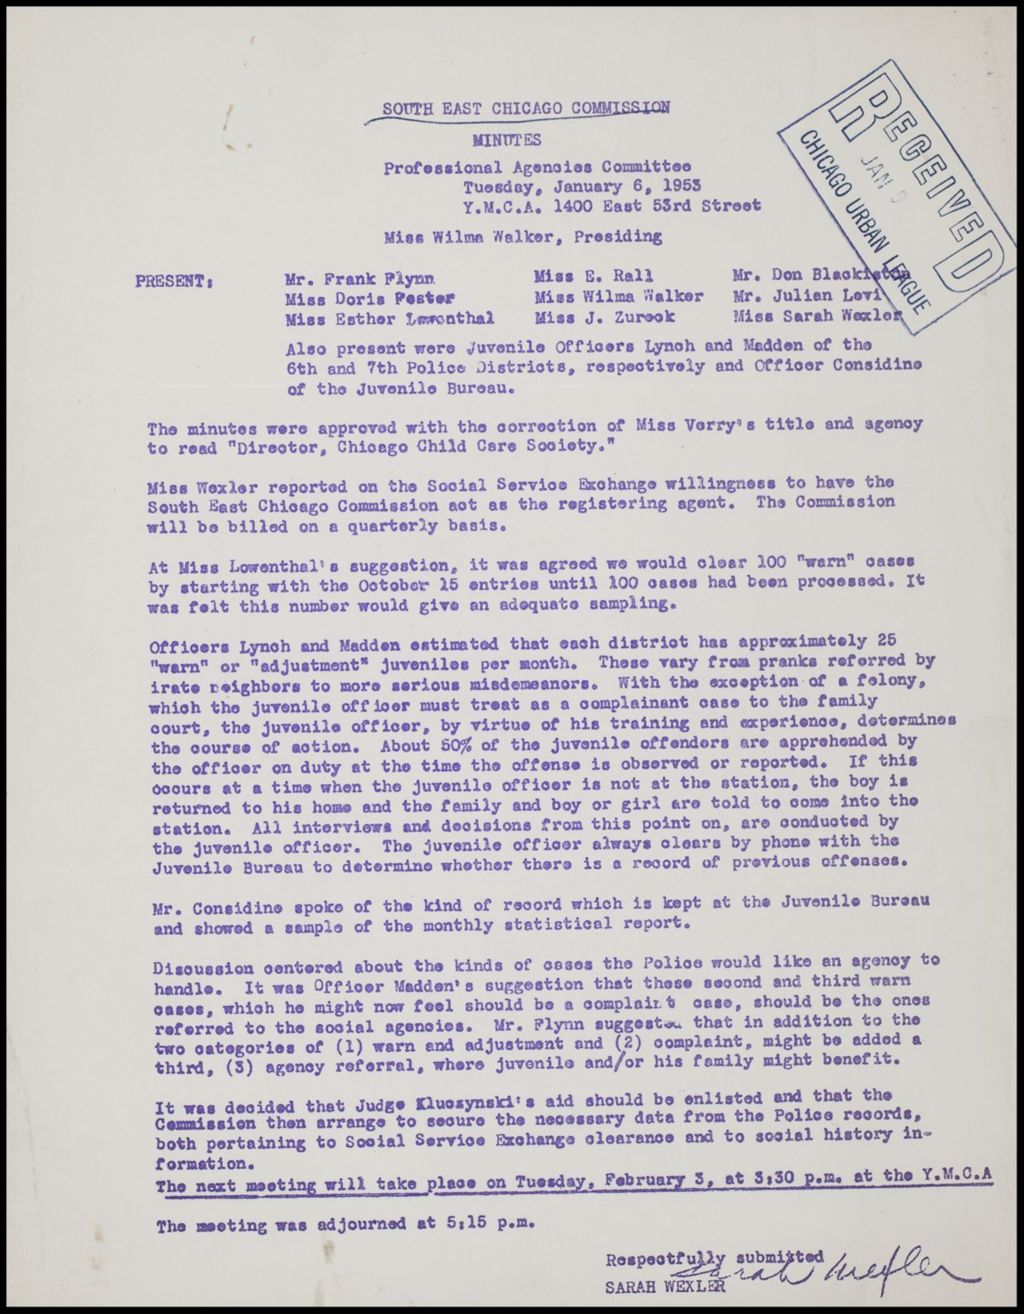 South East Chicago Commission - Minutes of Professional Agencies Committee, 1953 (Folder II-2331)